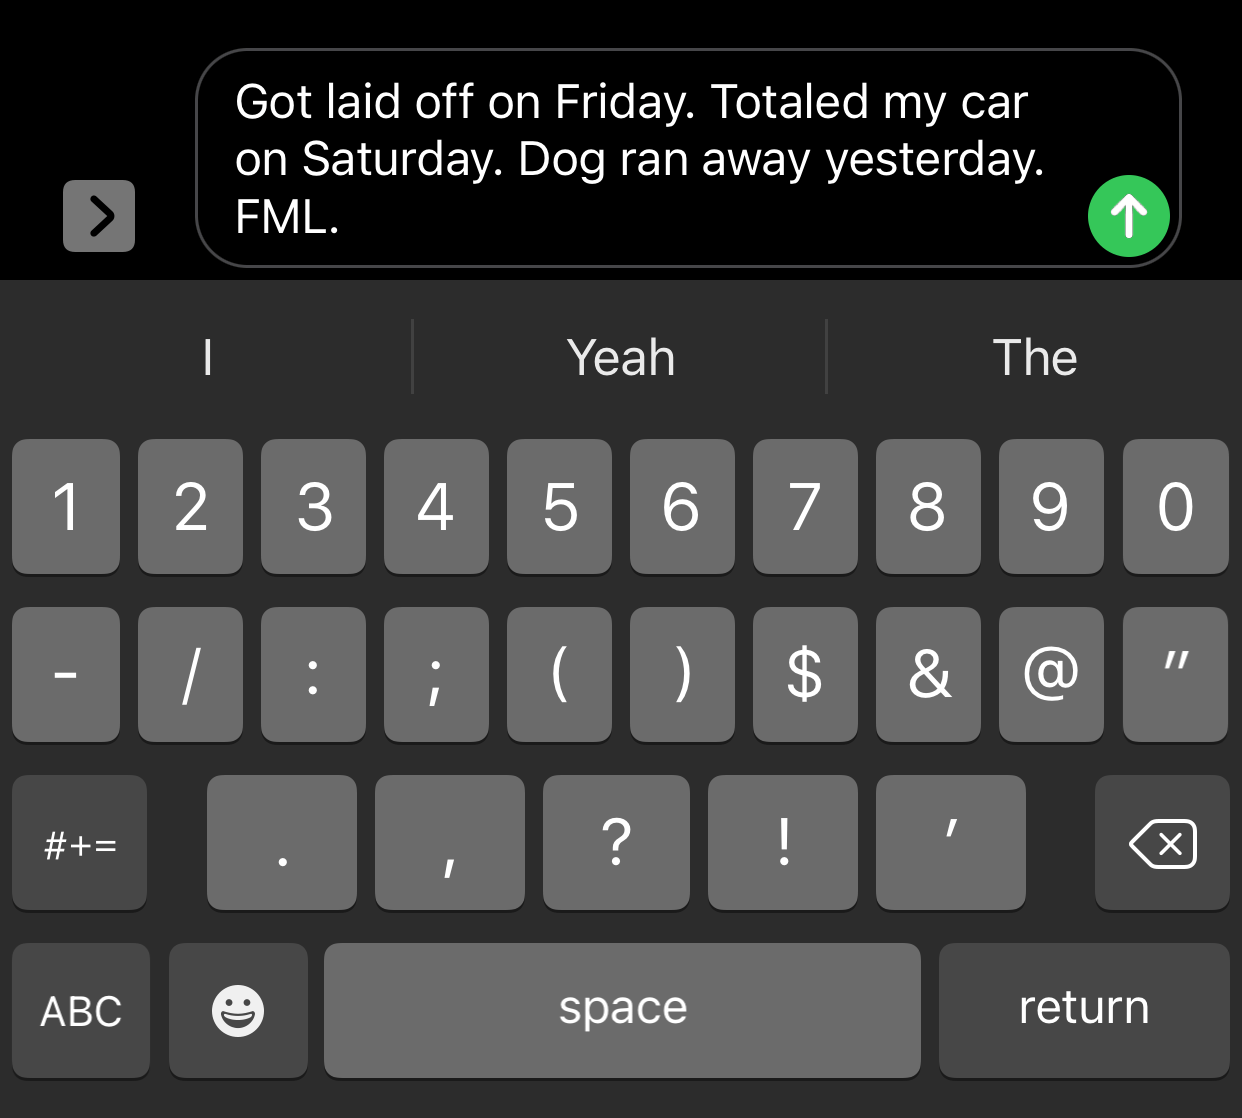 An example of the initialism FML in a text message.